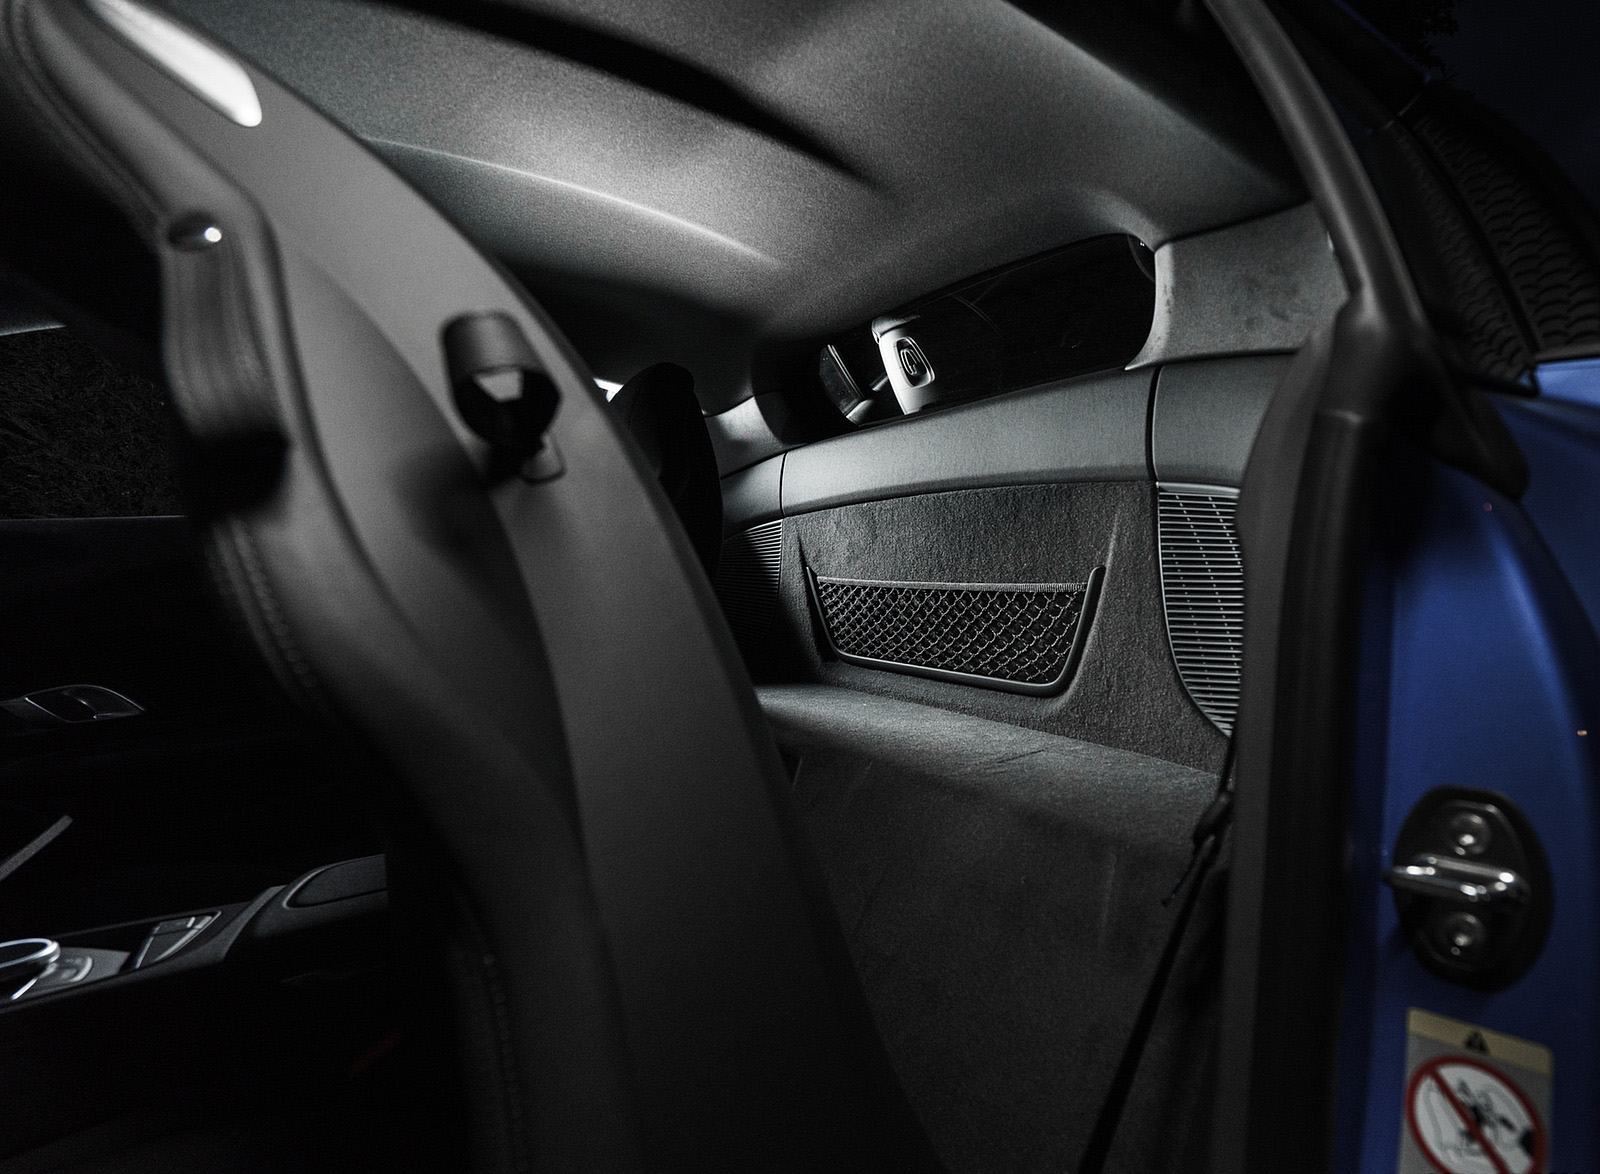 2020 Audi R8 V10 RWD Coupe (UK-Spec) Interior Detail Wallpapers #148 of 151